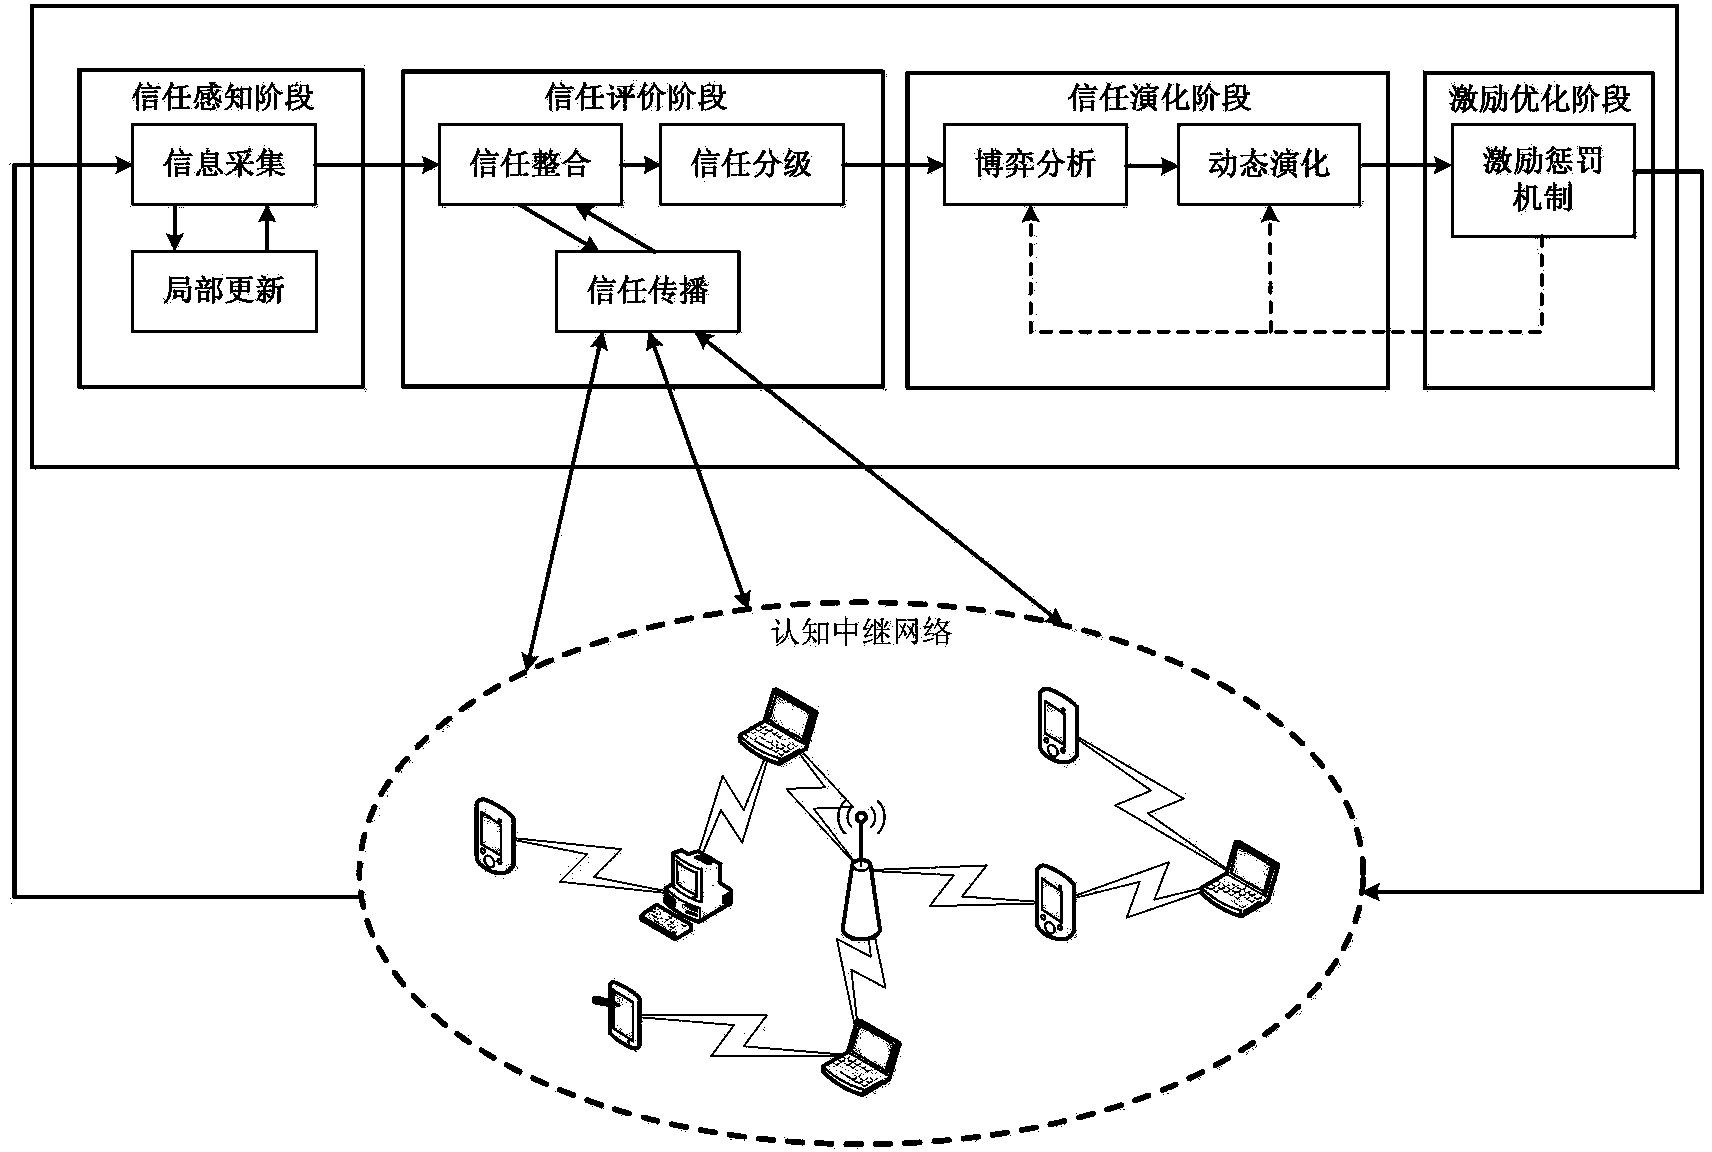 Recognition relay network trust management device and method based on dynamic evolution